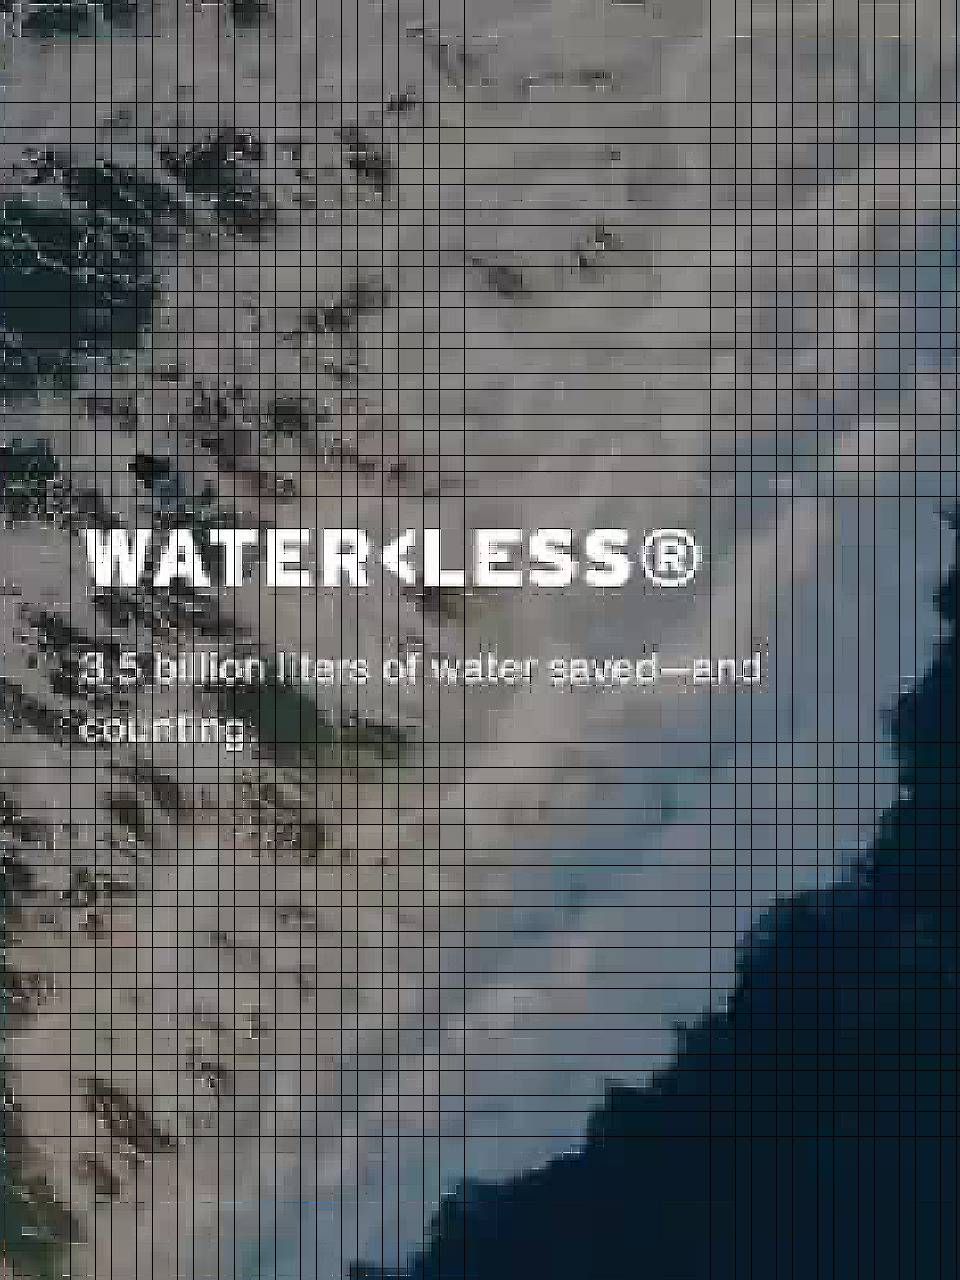 Water<Less. 3.5 billion liters of water saved - and counting.